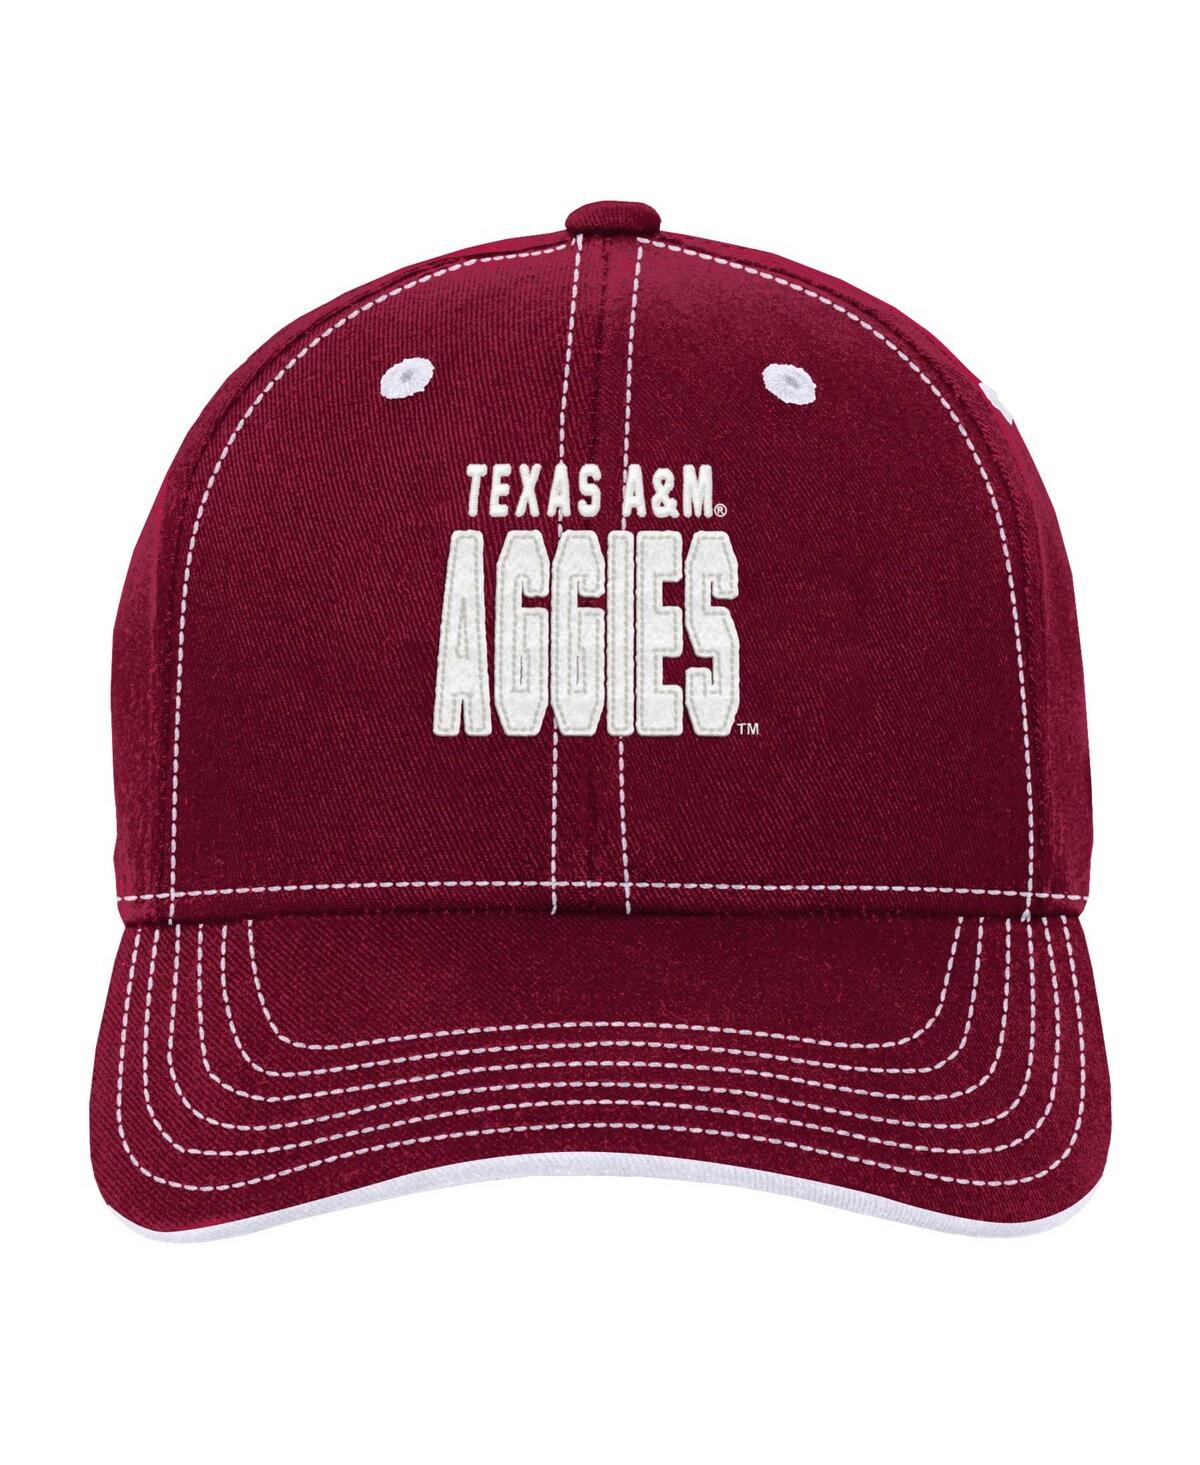 Shop Outerstuff Big Boys And Girls Maroon Texas A&m Aggies Old School Slouch Adjustable Hat